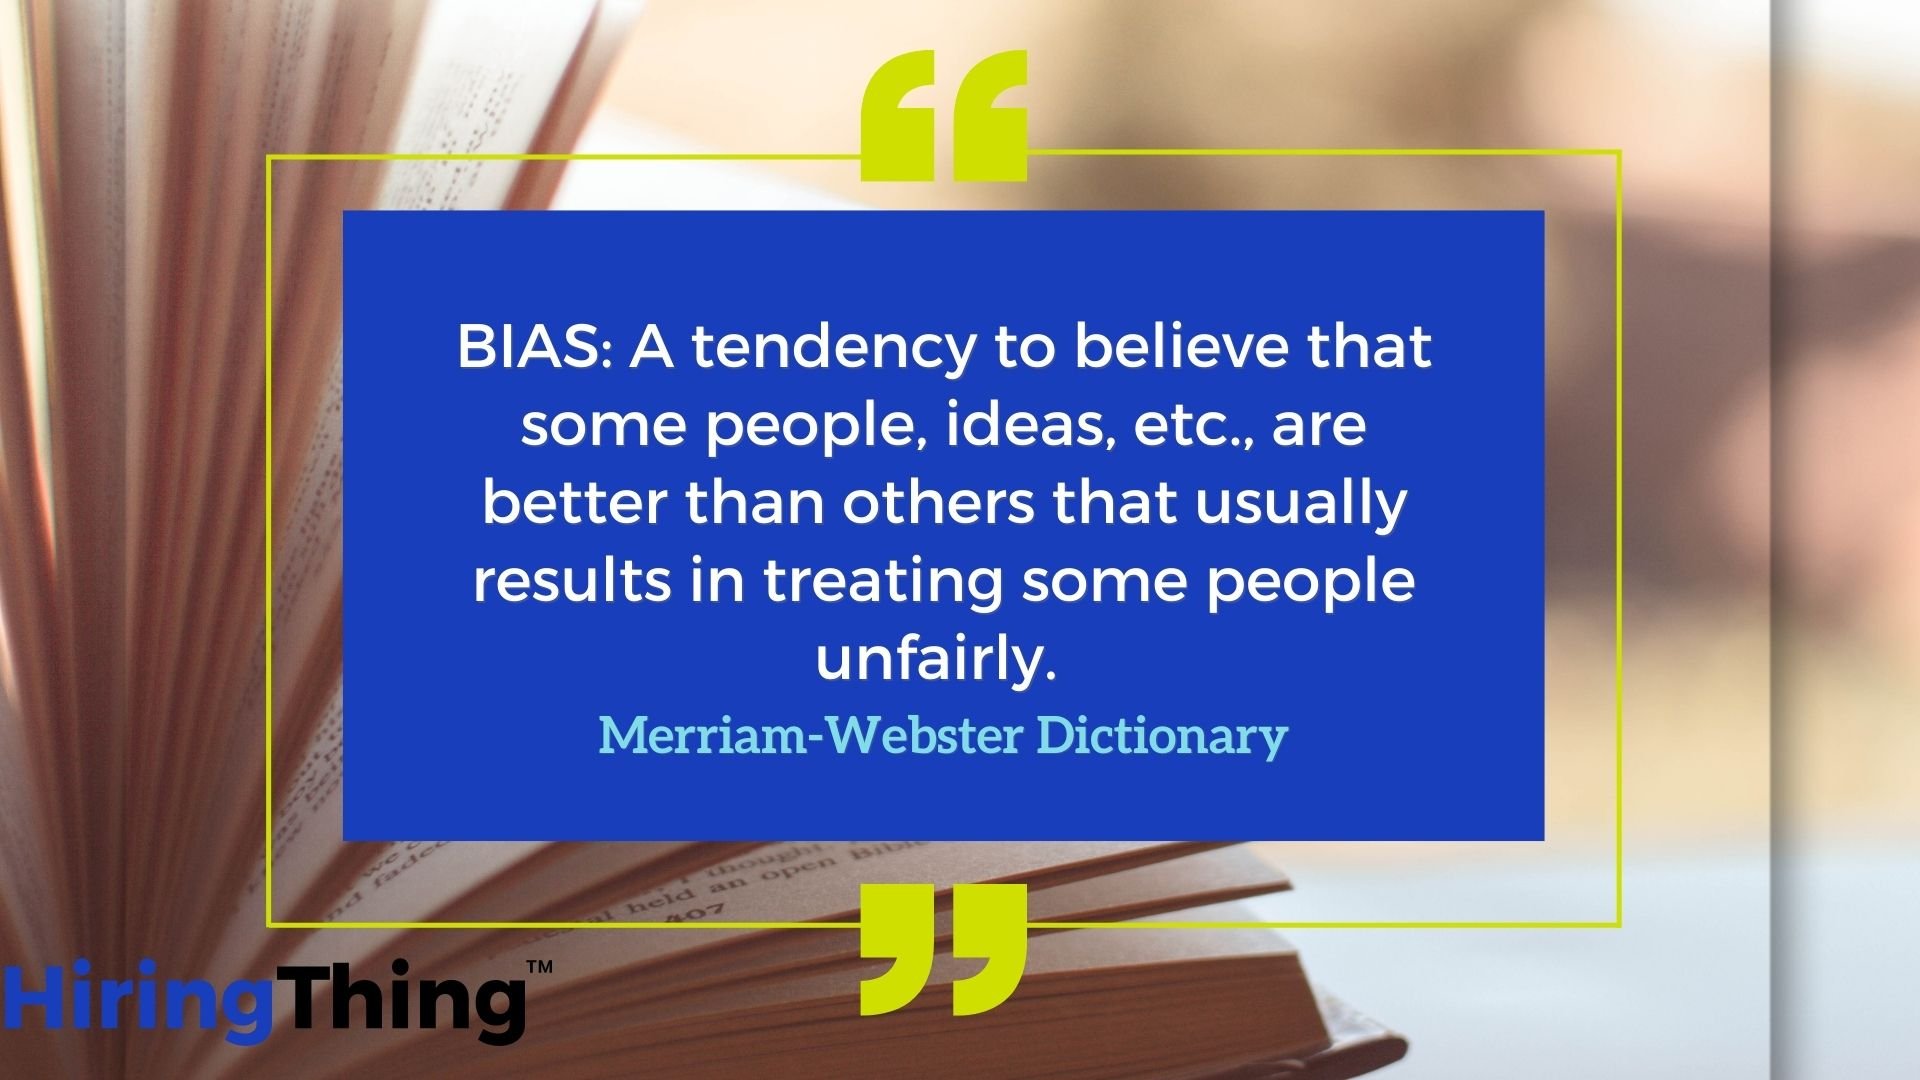 The Merriam-Webster dictionary definition of bias.